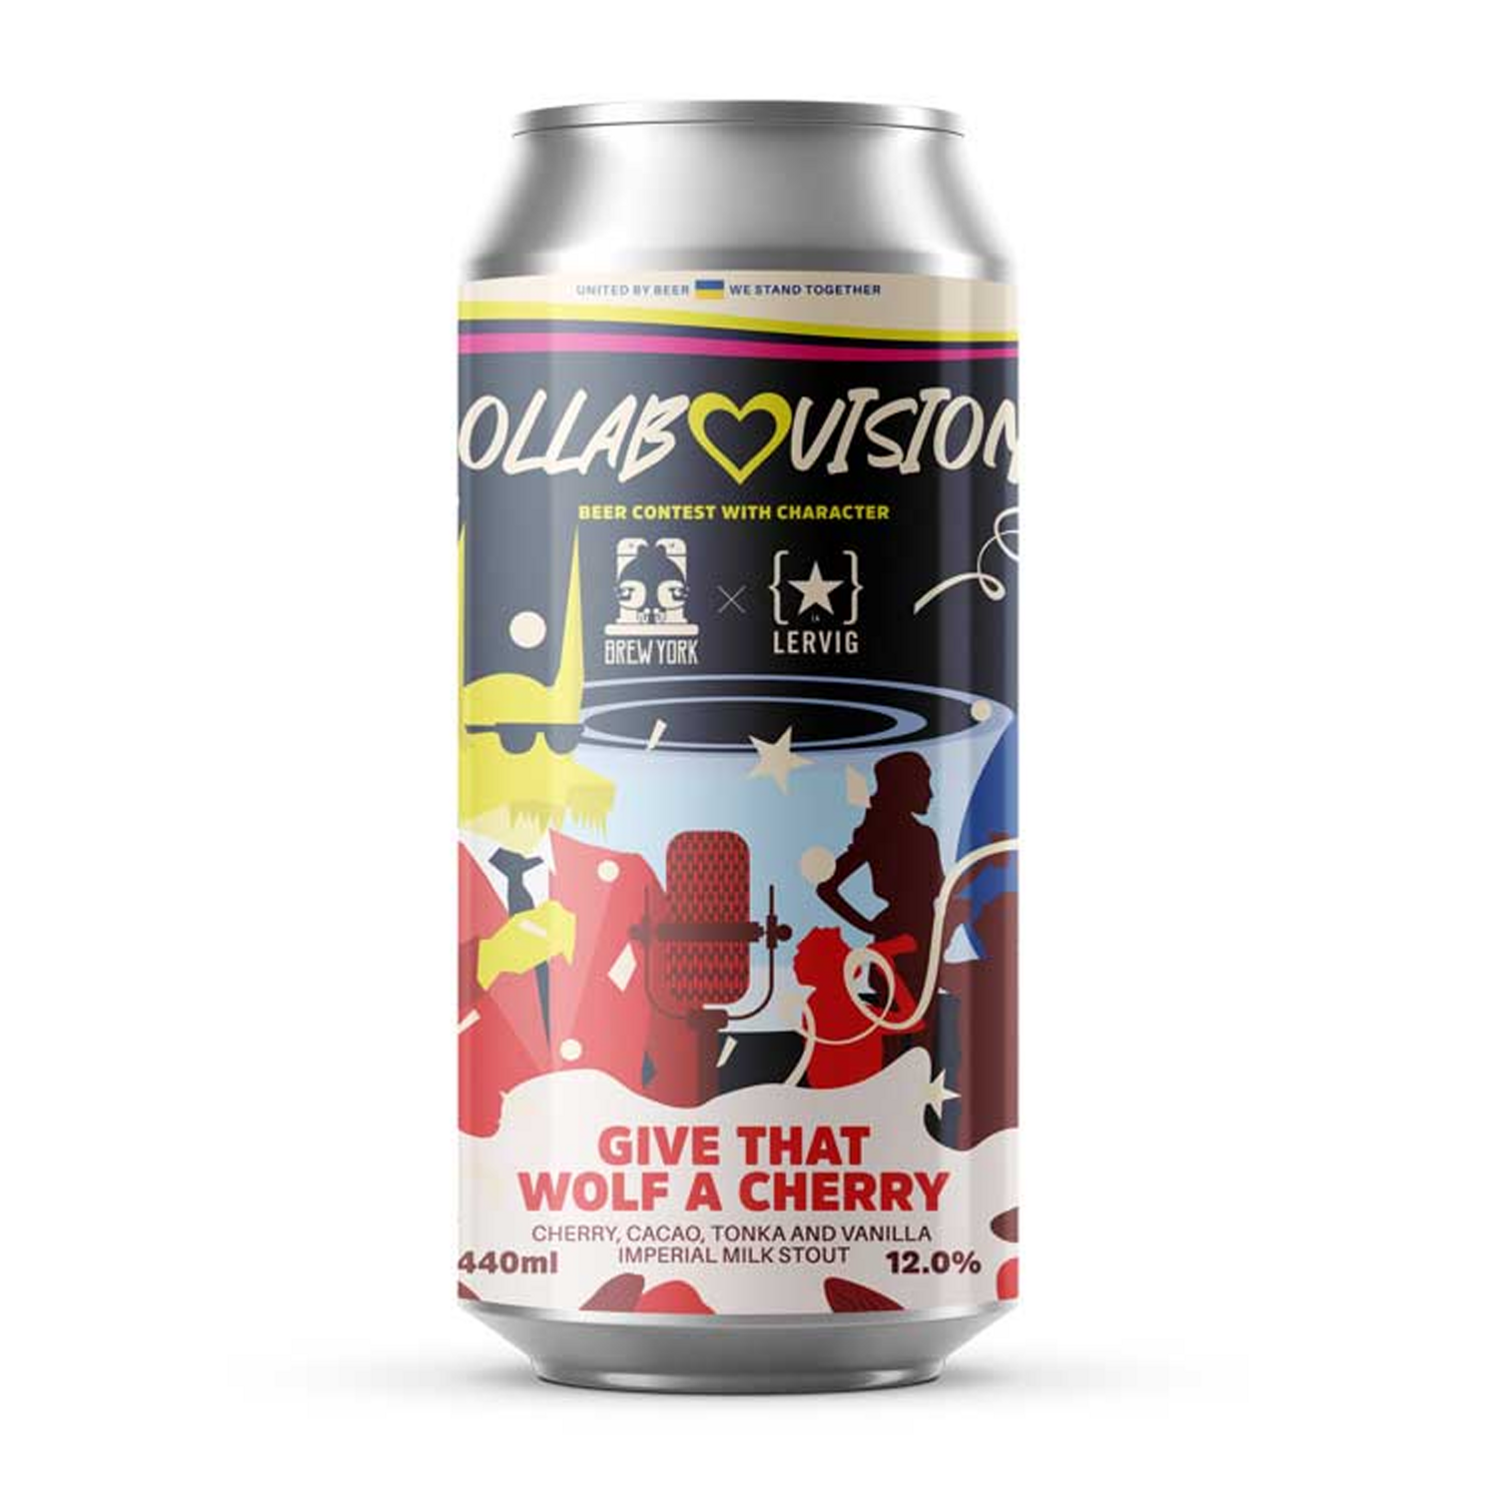 Brew York x Lervig Collabovision Give That Wolf A Cherry Imperial Milk Stout